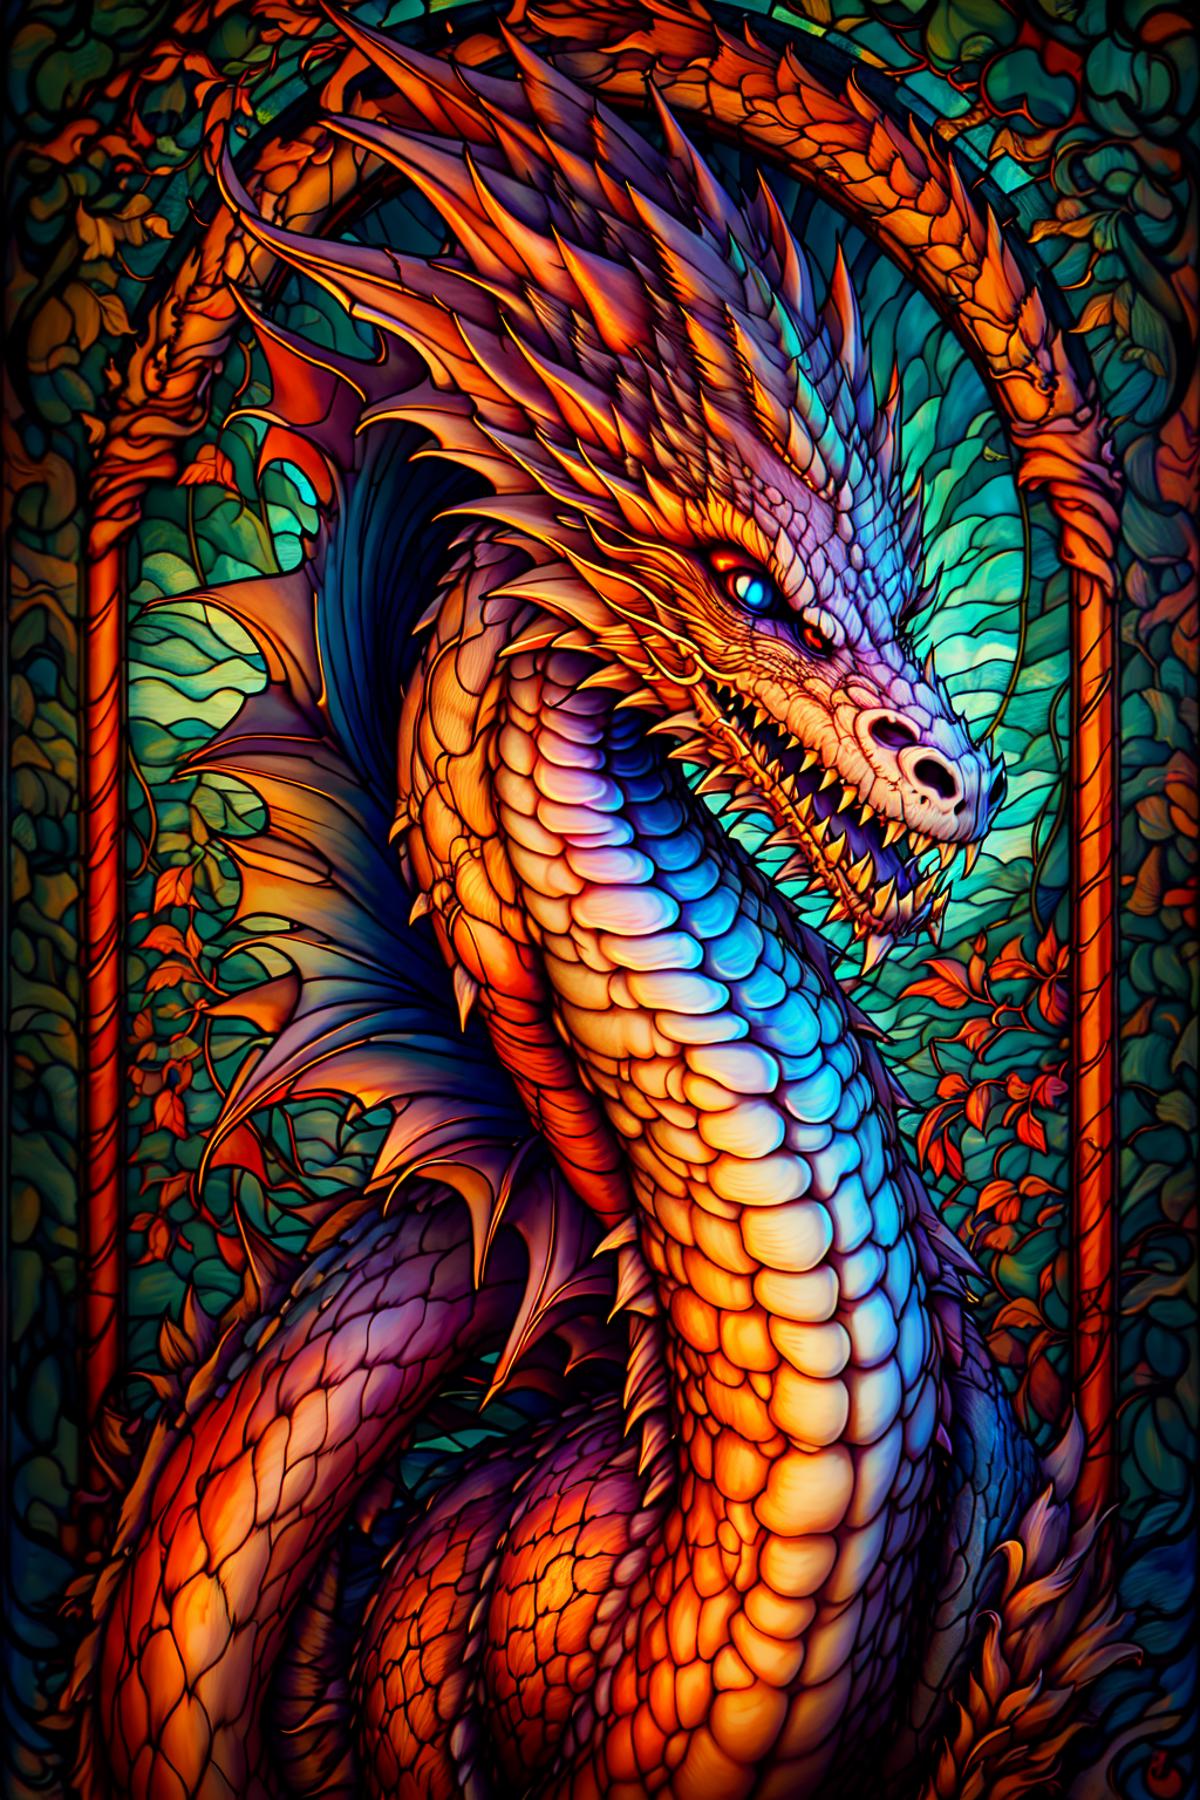 Stained Glass image by LDWorksDervlex